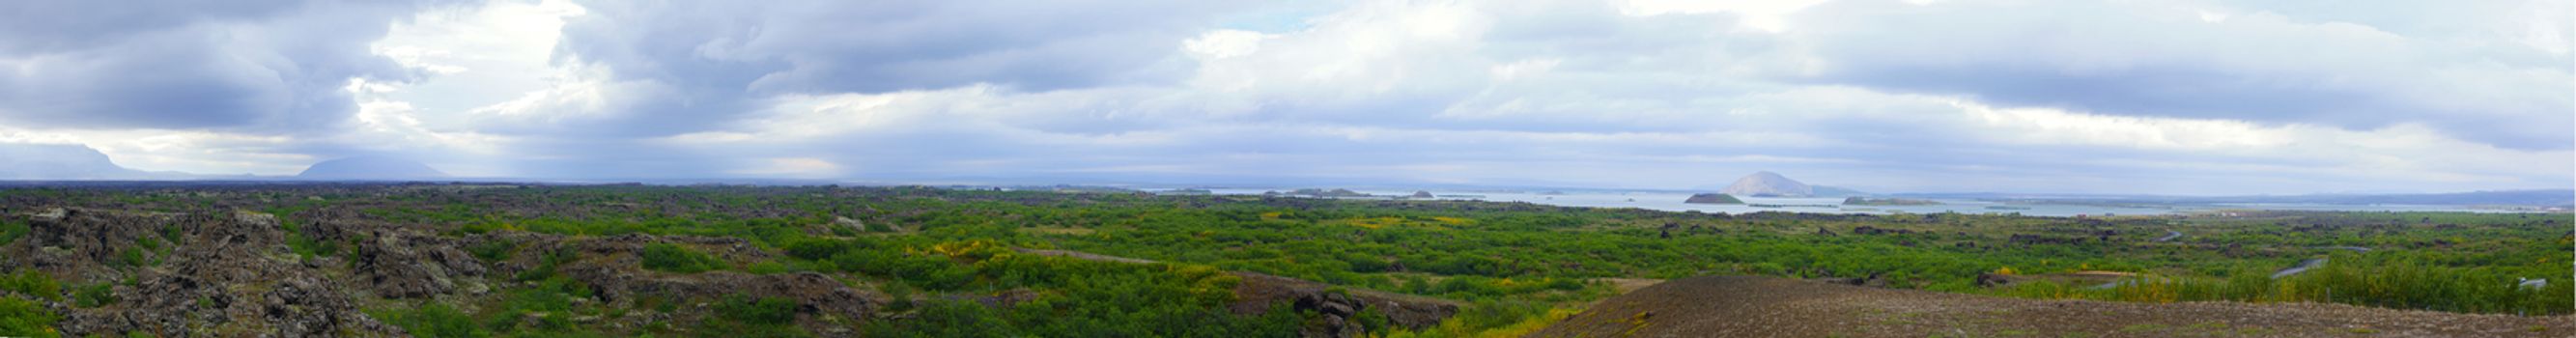 The Dimmuborgir area is composed of various volcanic caves and rock formations, Iceland. Panorama